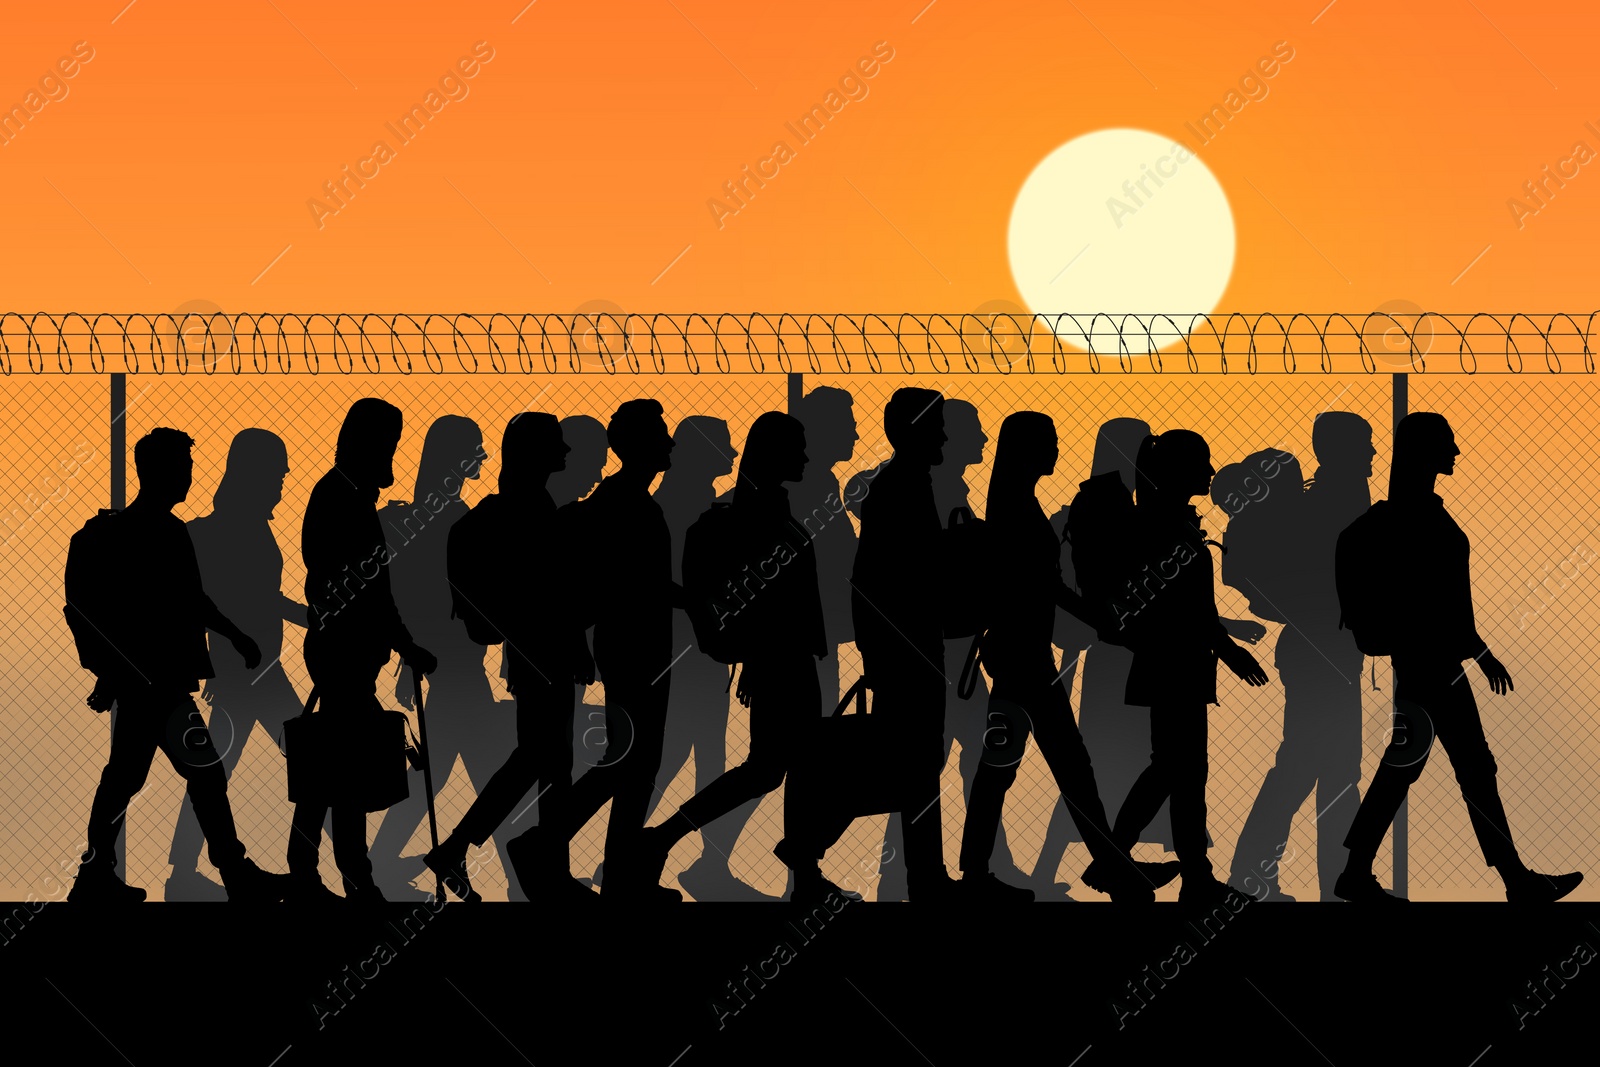 Image of Immigration. Silhouettes of people walking along perimeter fence with barbed wire on top at sunset, illustration